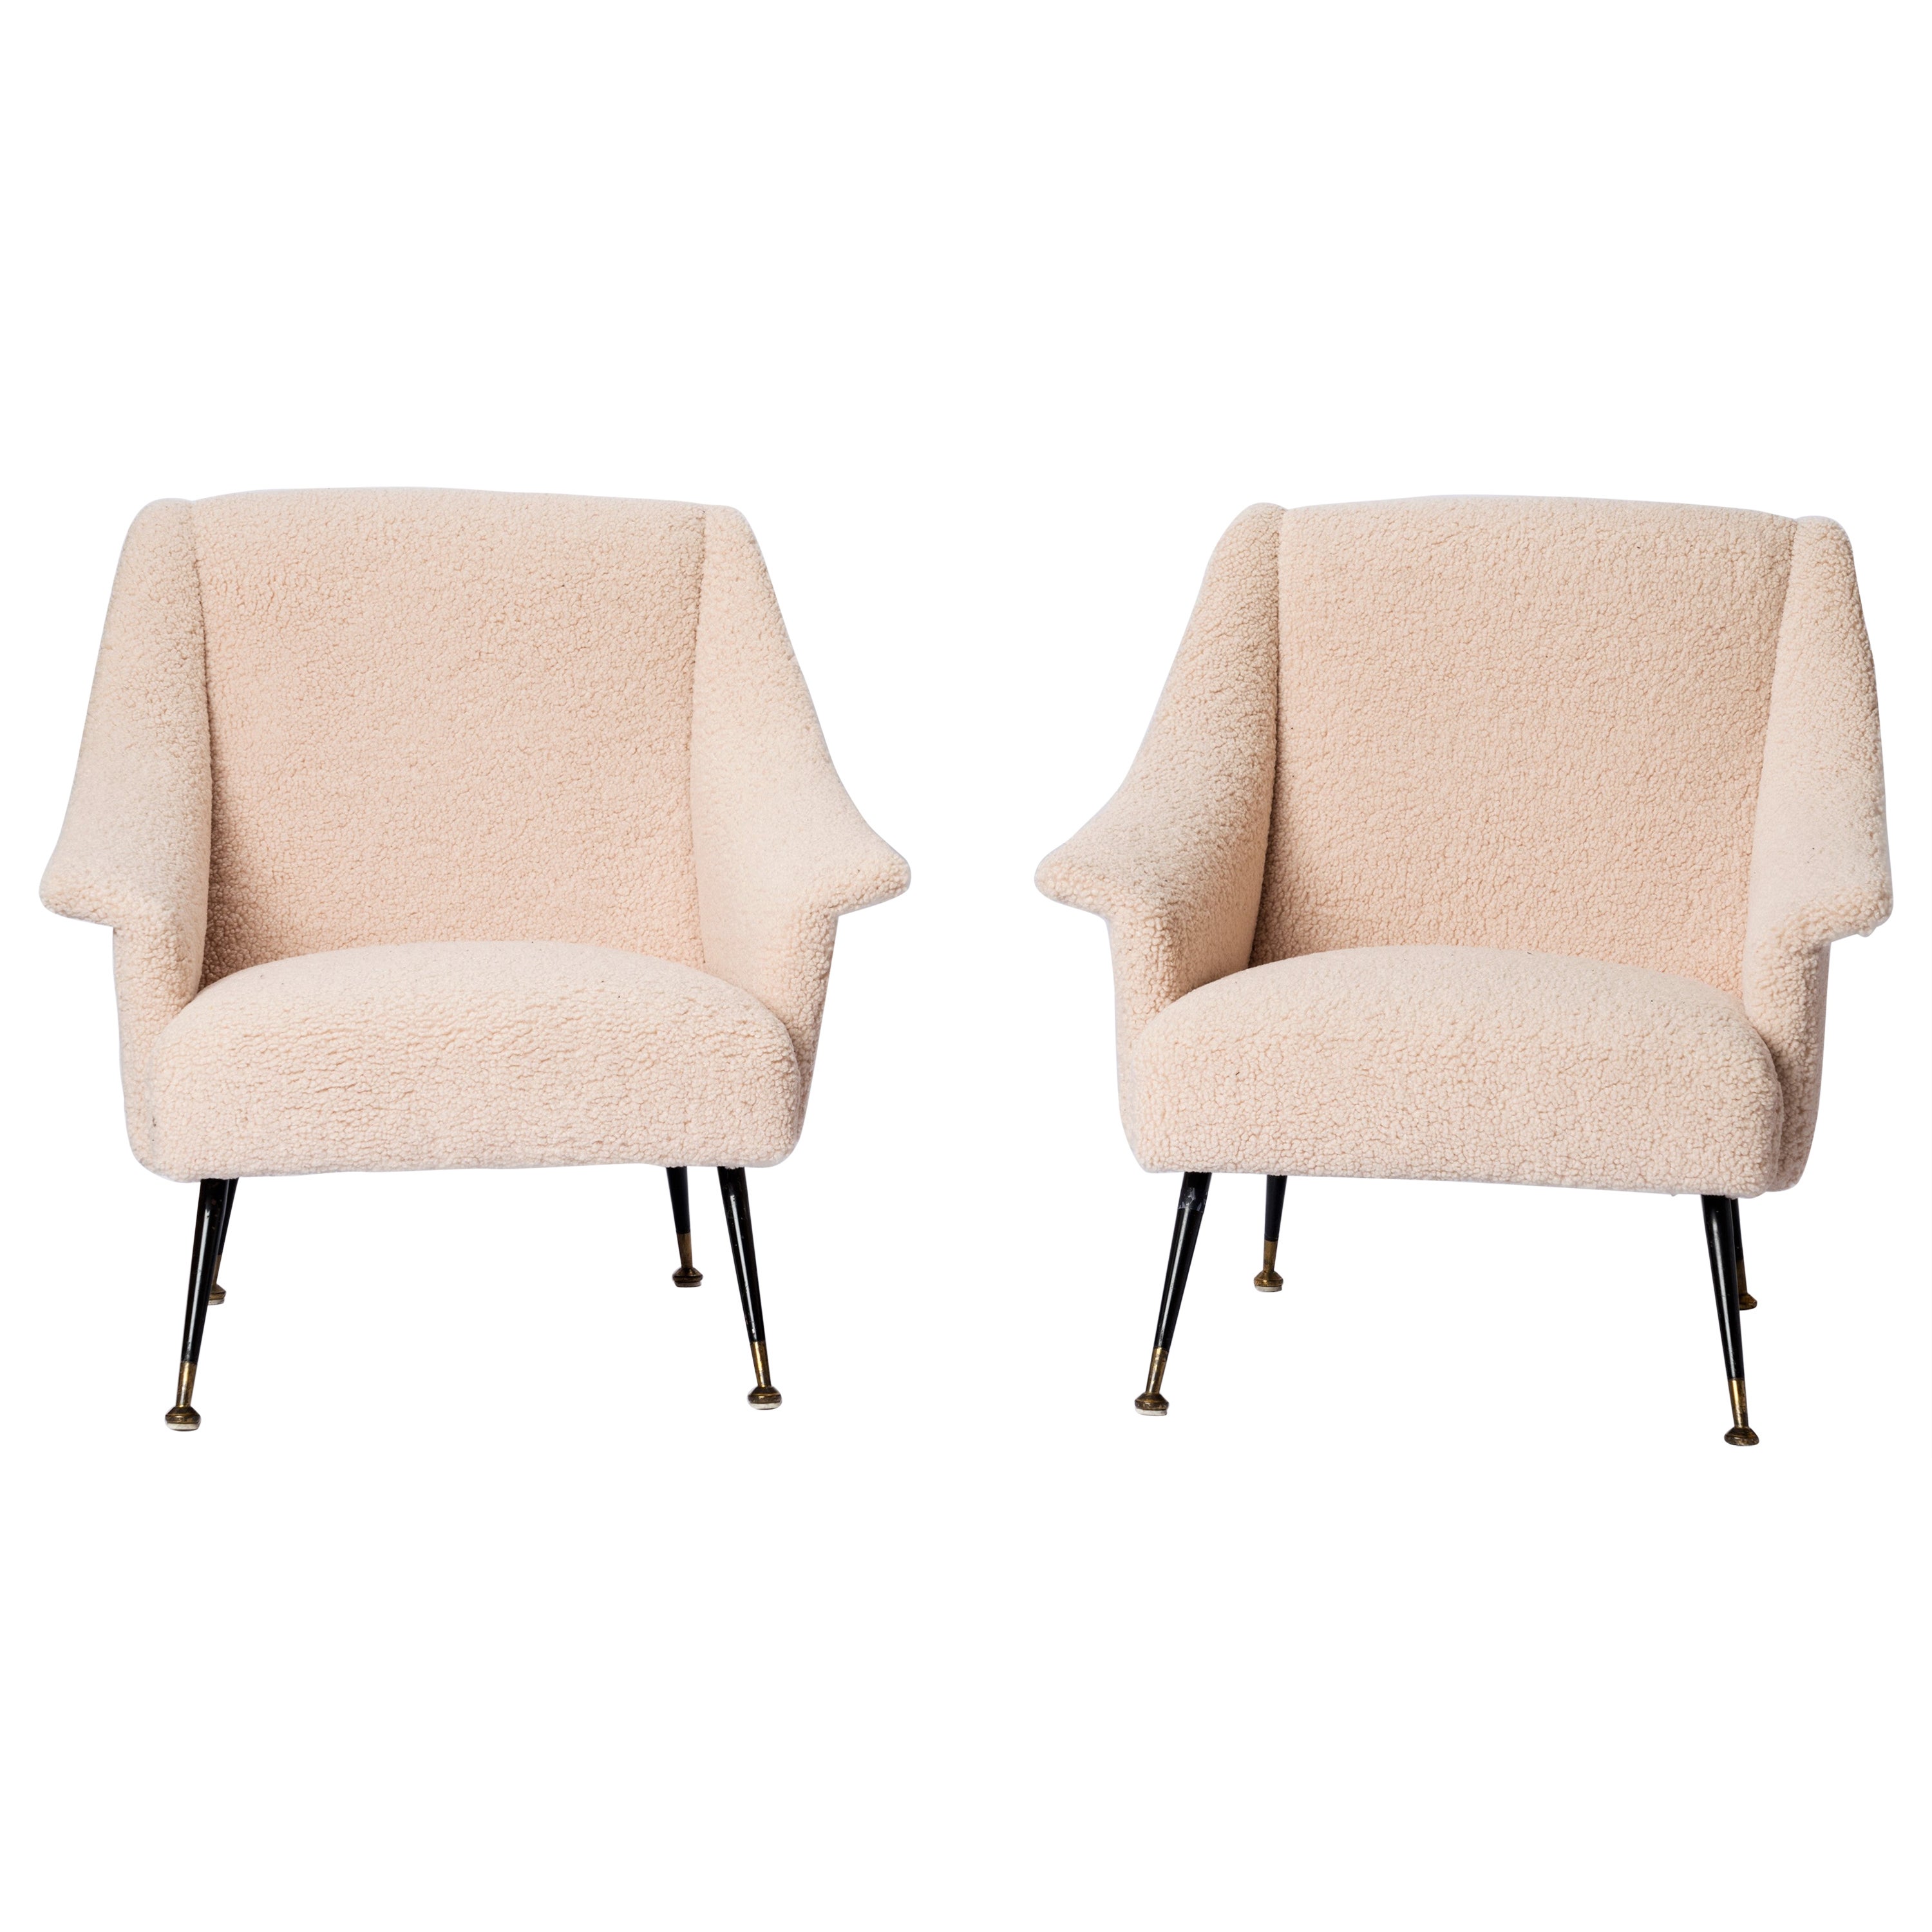 Pair of Creme Bouclé Italian Armchairs with Black and Brass Feet, Italy, 1960s For Sale